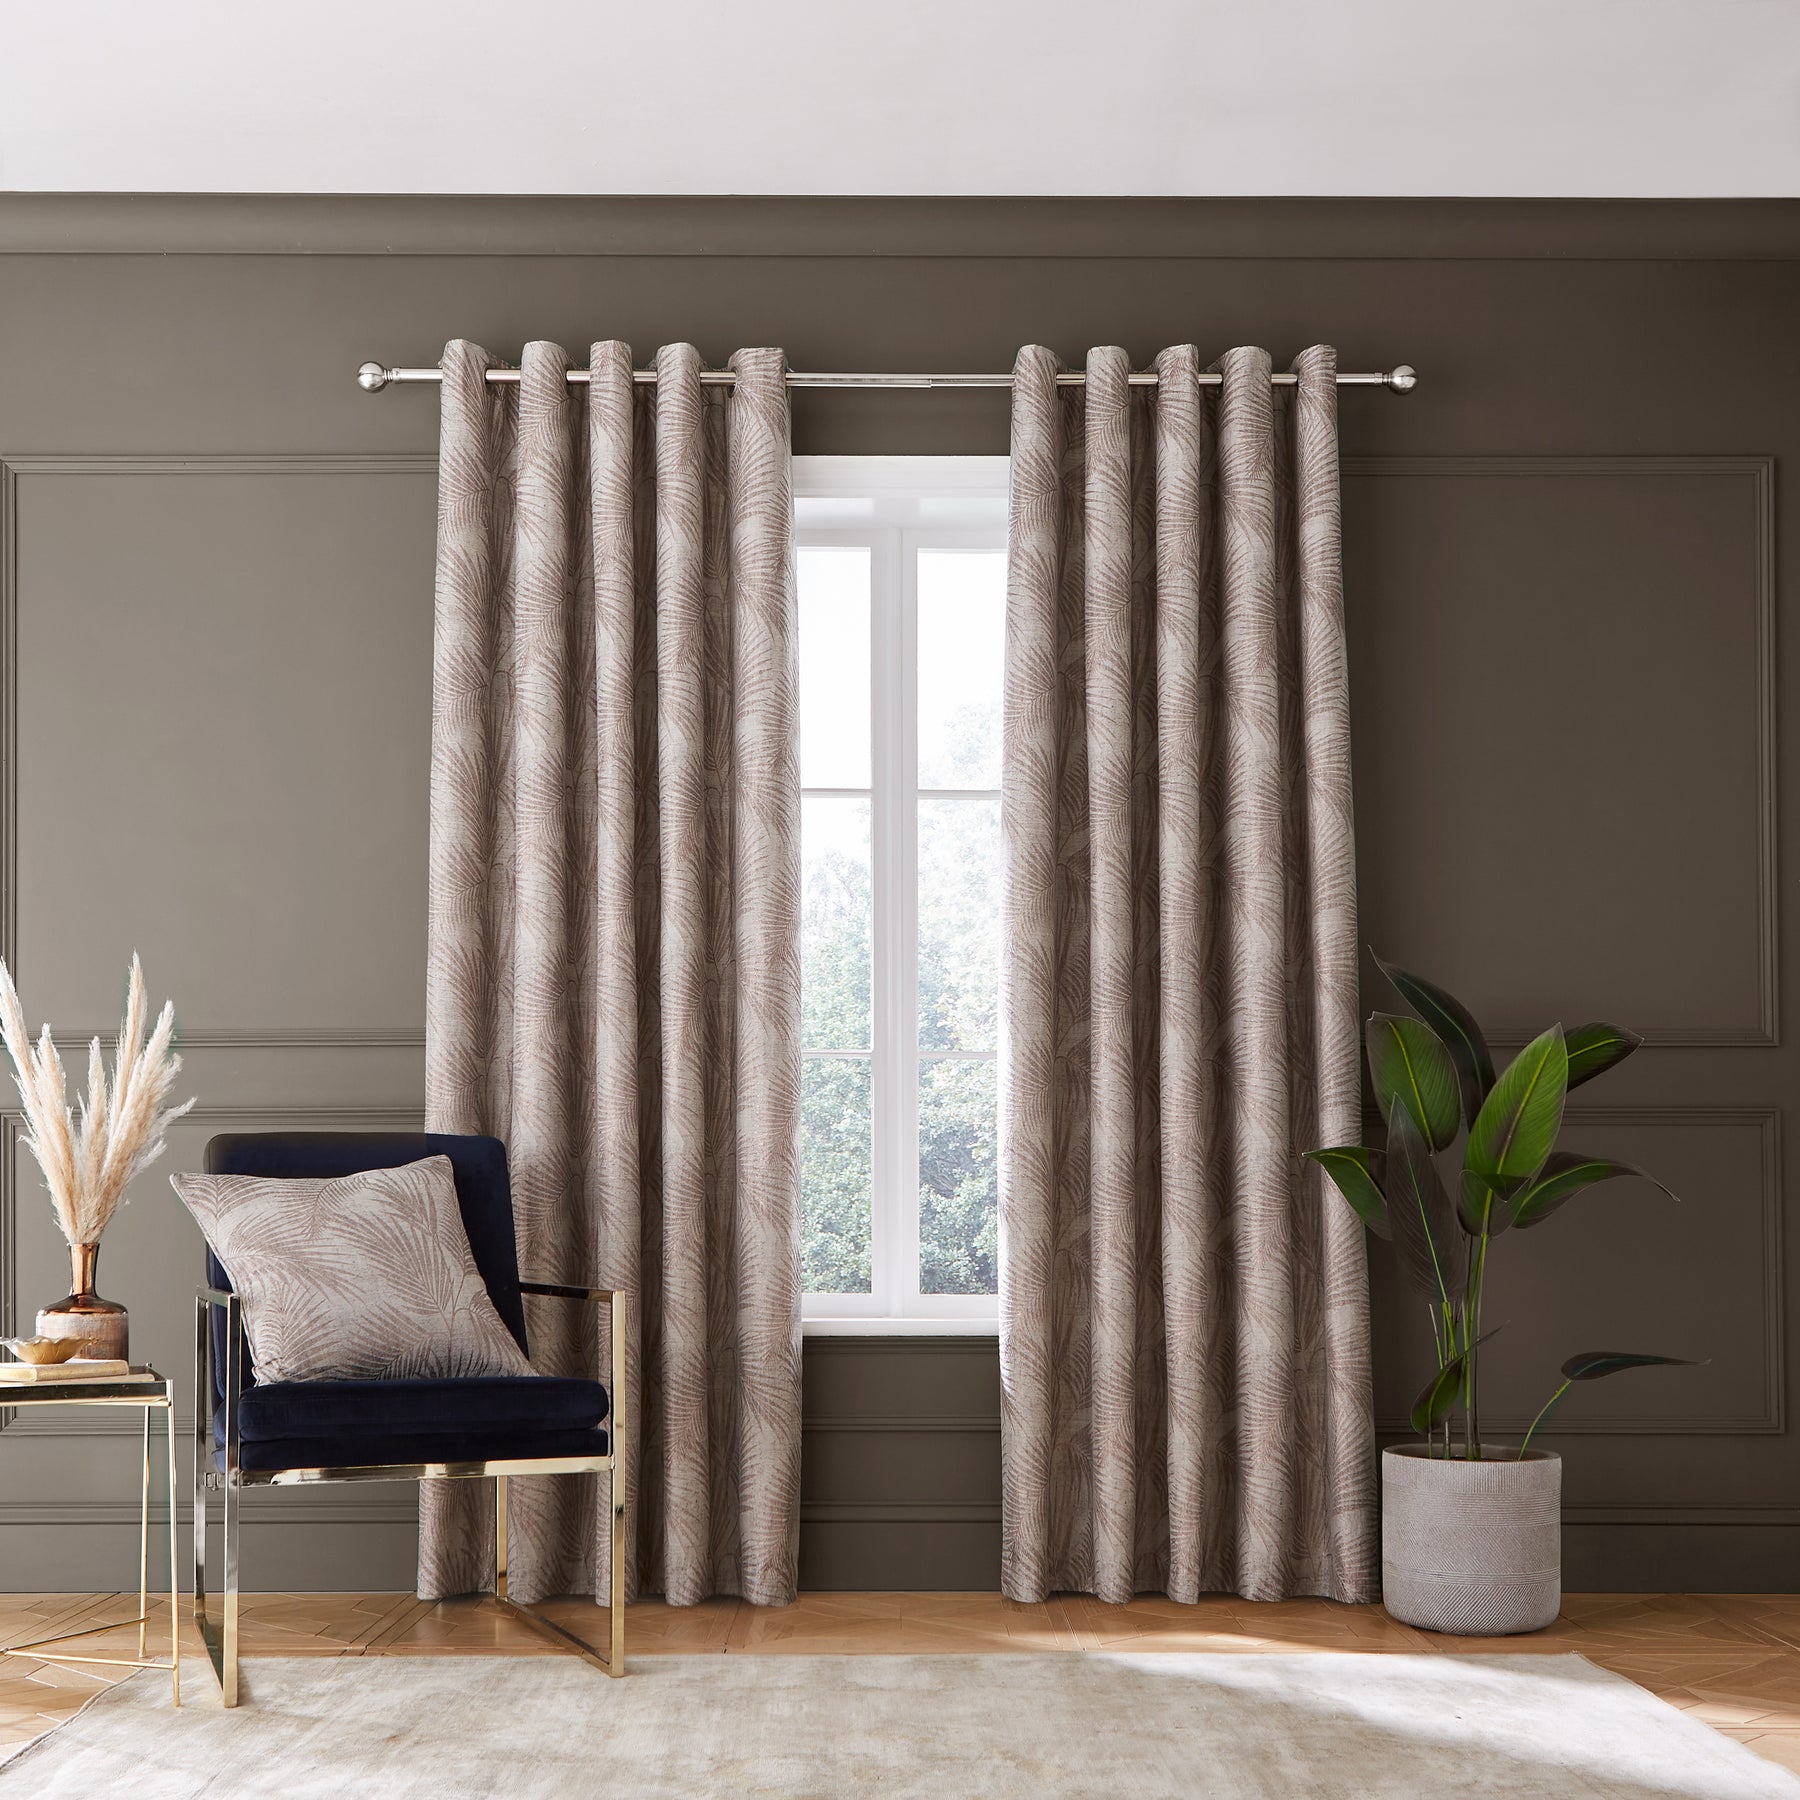 Hyperion Tamra Palm Ready Made Eyelet Curtains Natural